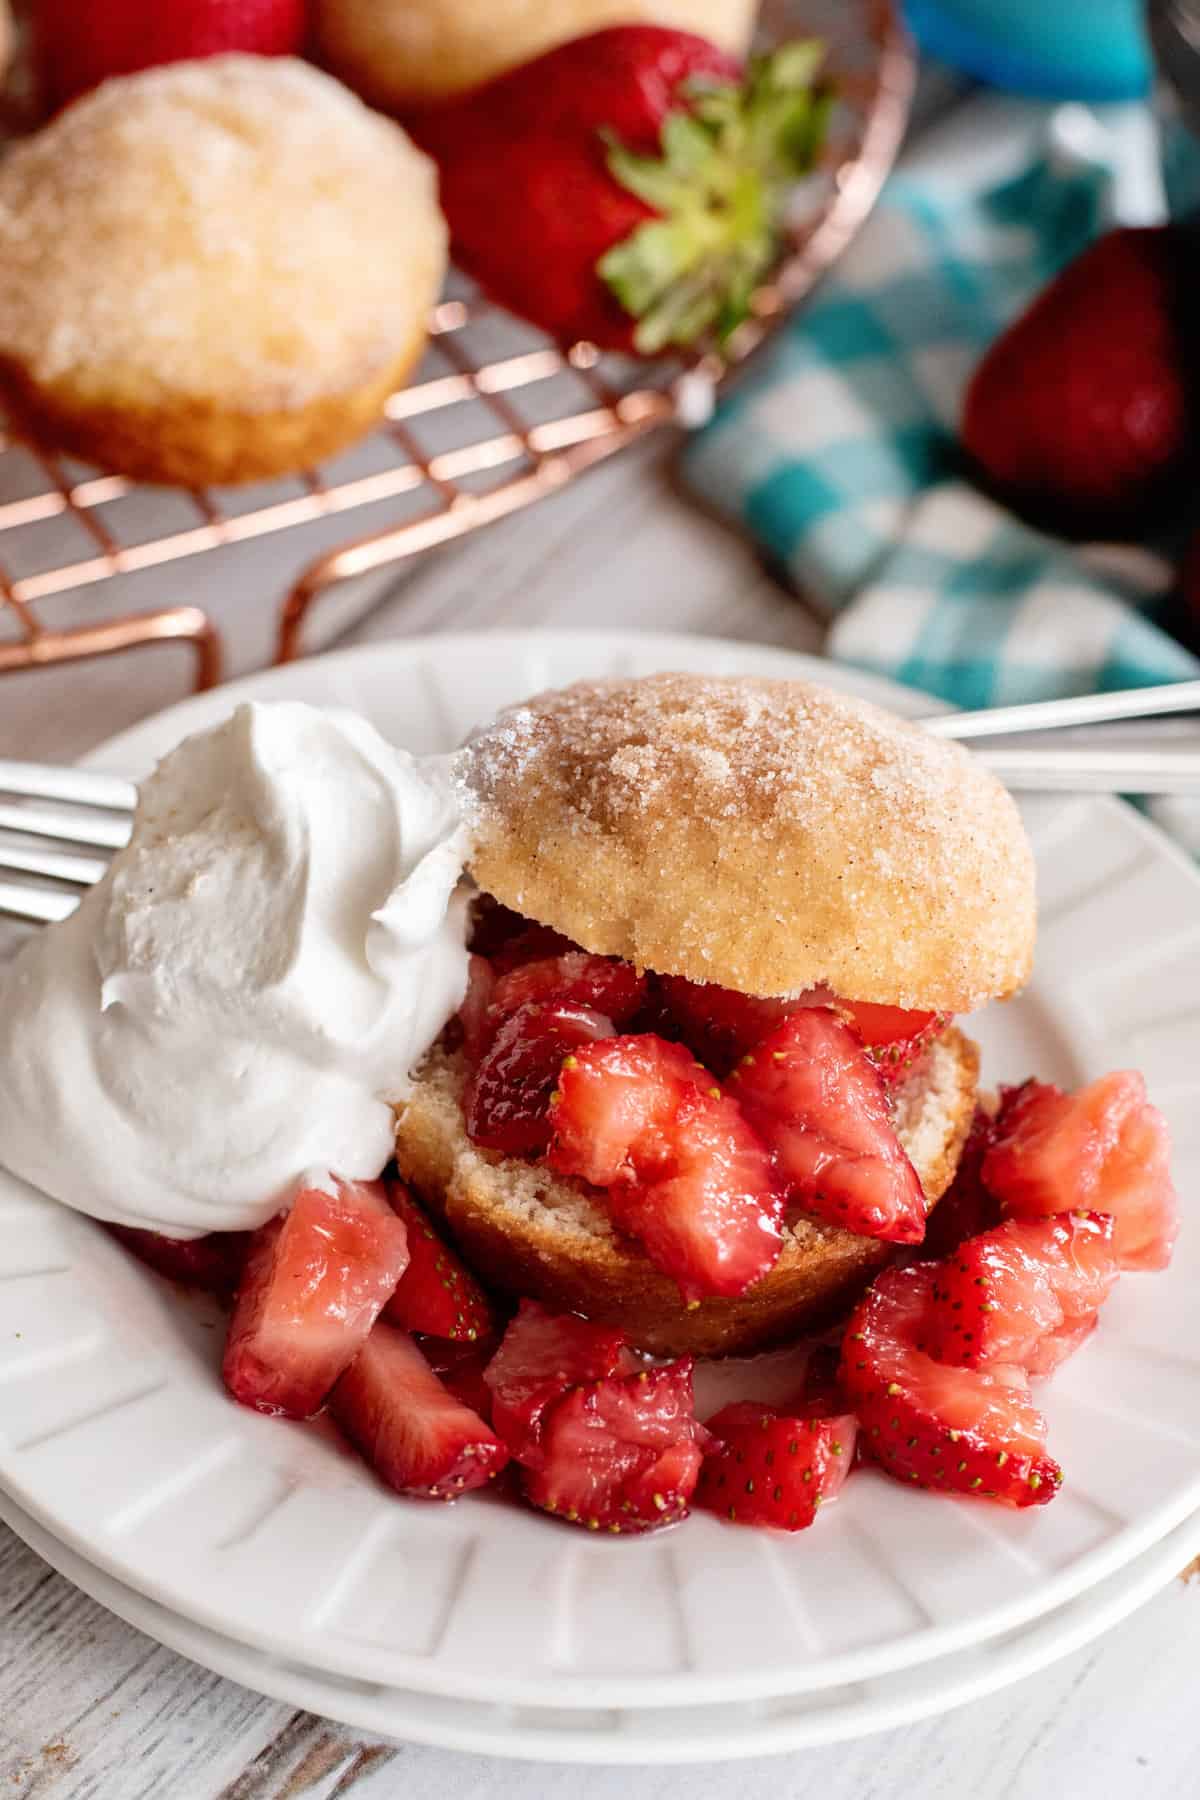 French breakfast puff with strawberries and whipped cream.